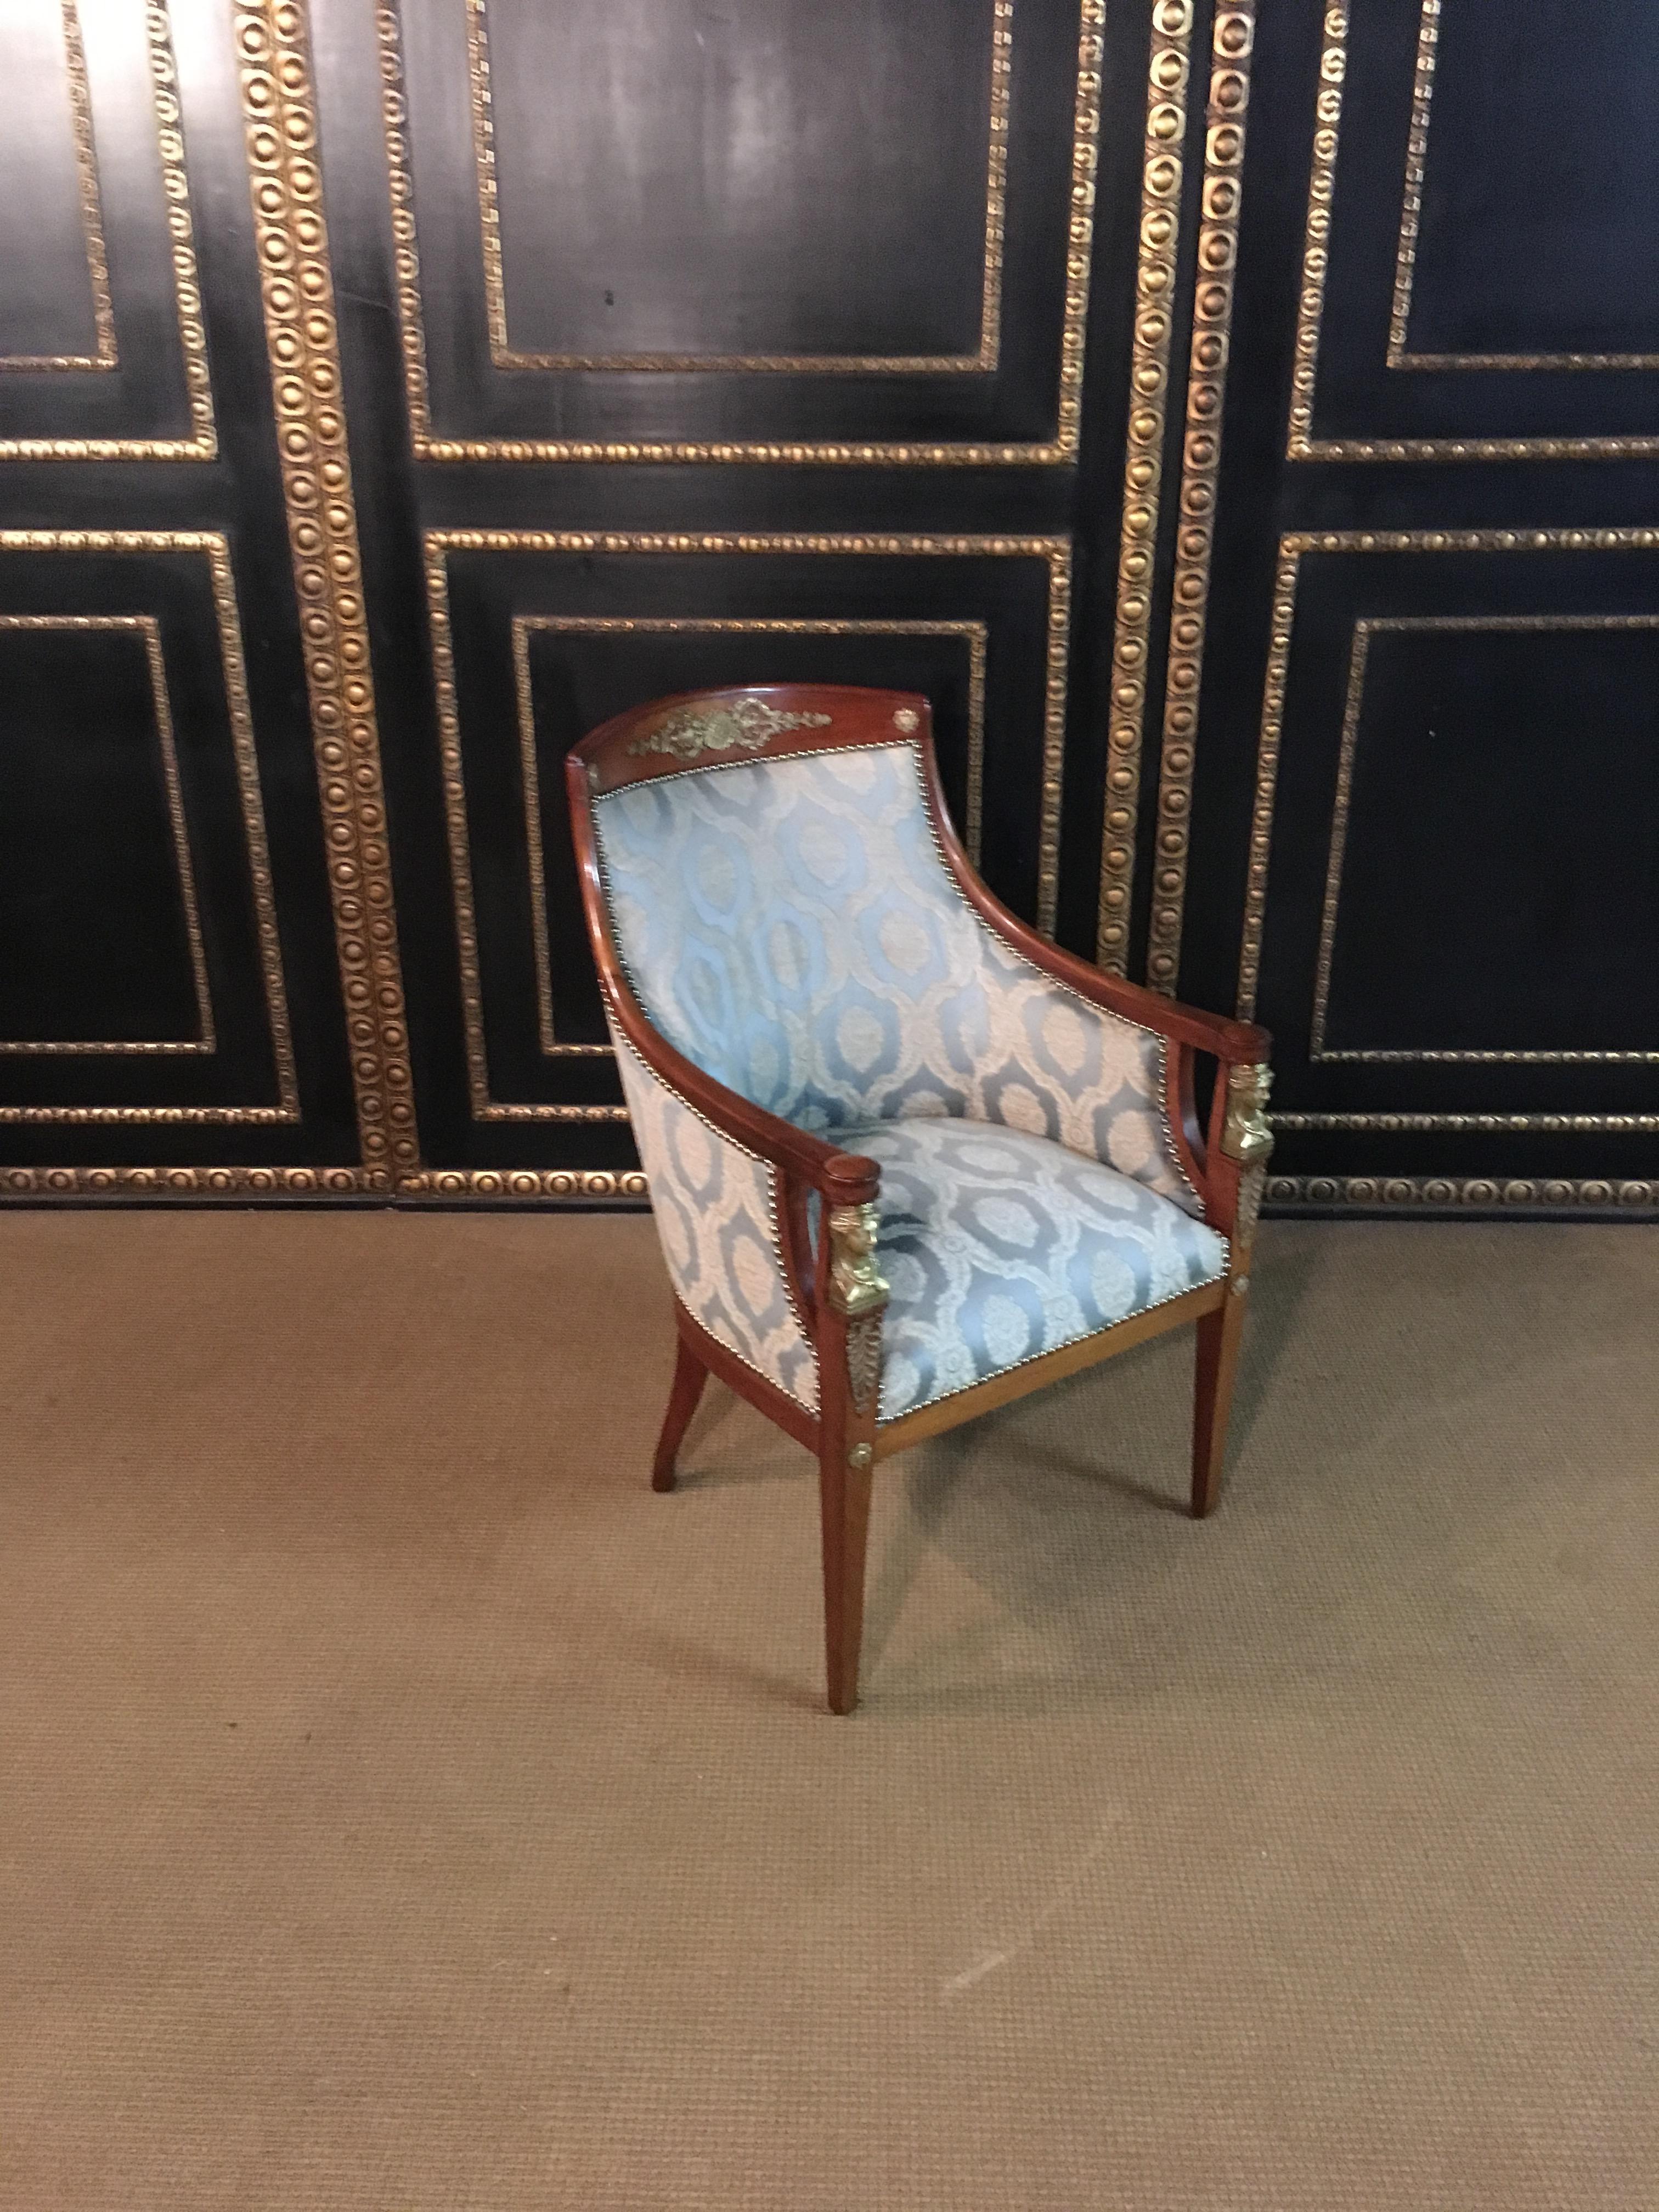 Original Empire armchair circa 1860-1880 massive mahogony 2 beautiful armchairs from an Empire room.

Each 2 figures provided cast bronze.

The chairs have a nice curve, in a top condition

 Dimensions.
Width:62cm
Height:99cm
Depth:70cm.

   